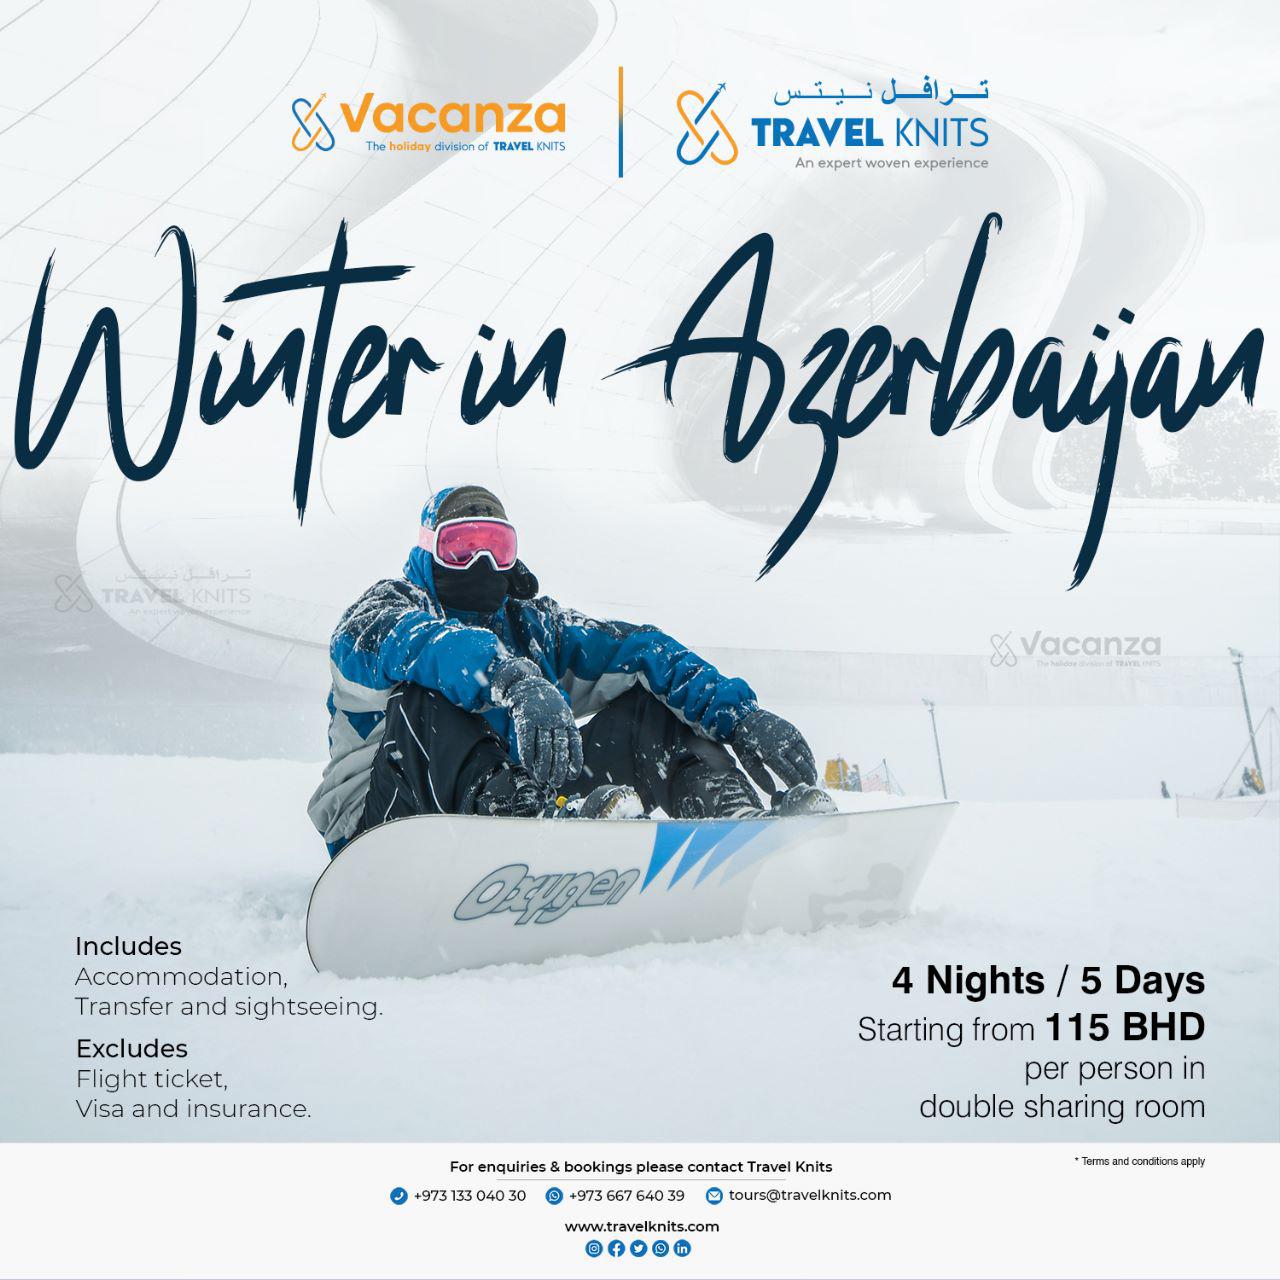 Winter in azerbaijan Tour Packages - Book honeymoon ,family,adventure tour packages to Winter in azerbaijan |Travel Knits